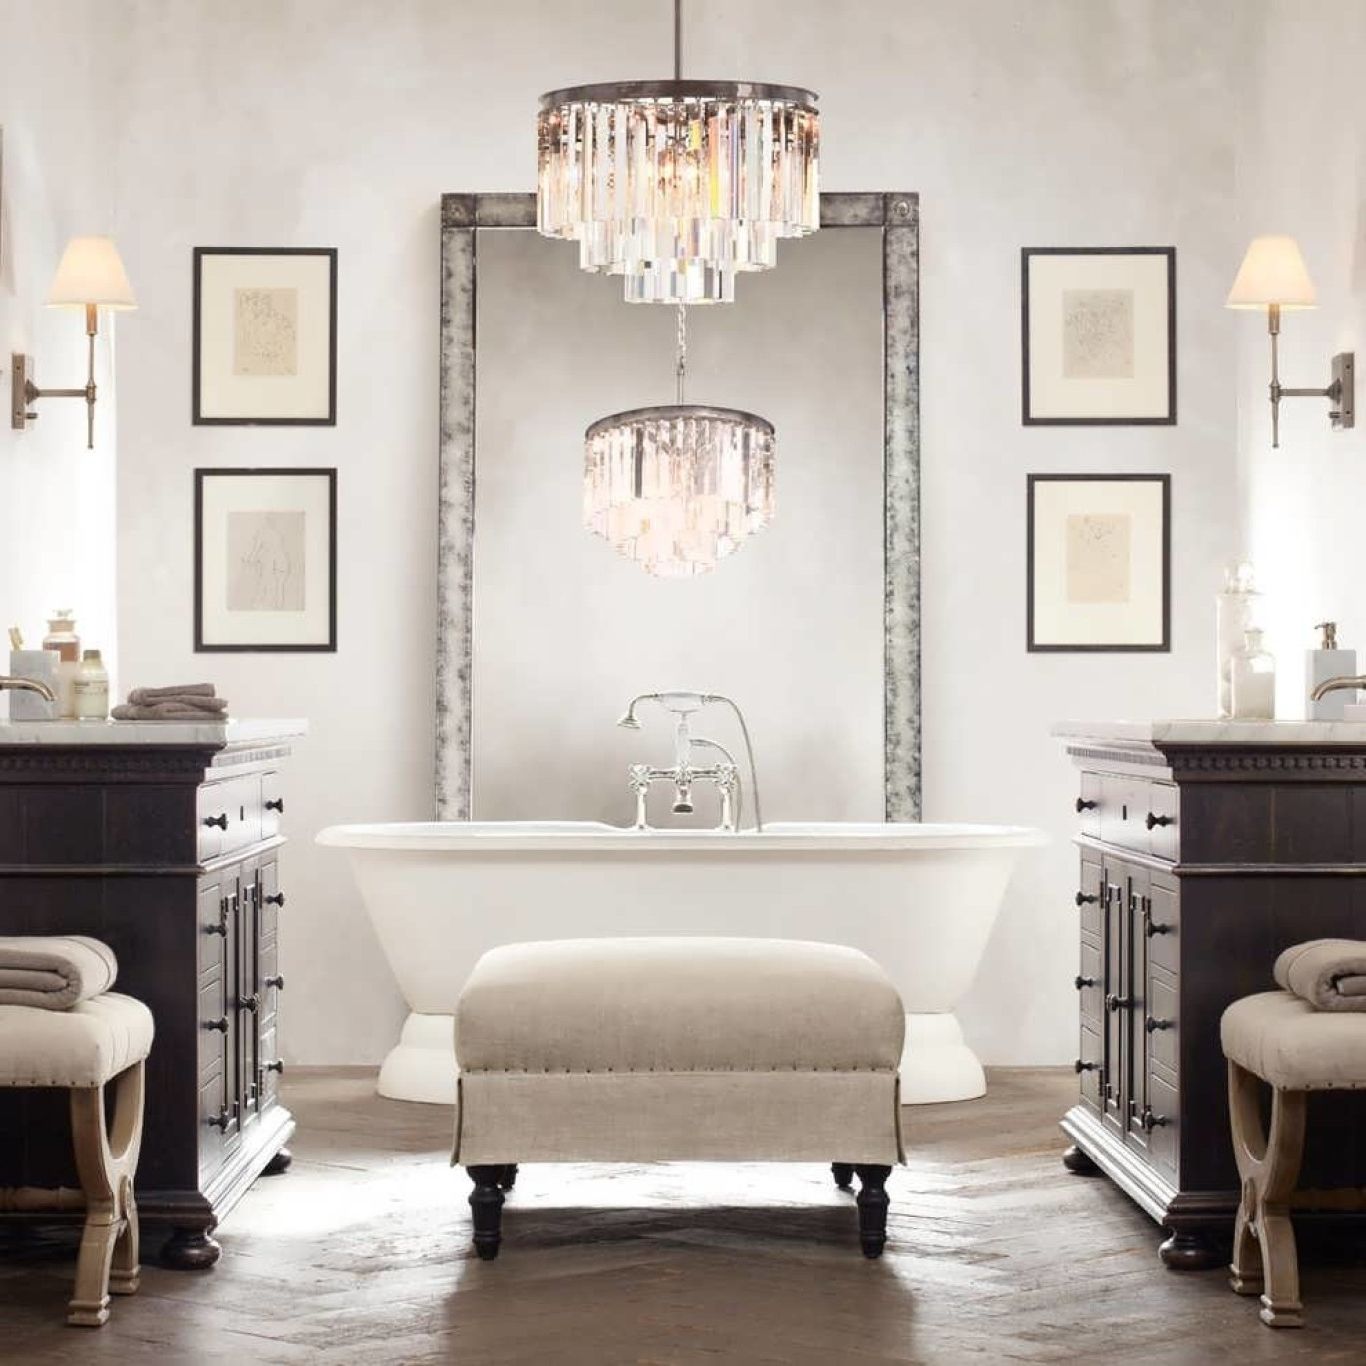 Most Up To Date Bathroom Lighting With Matching Chandeliers Throughout Modern Bathroom Lighting (View 1 of 15)